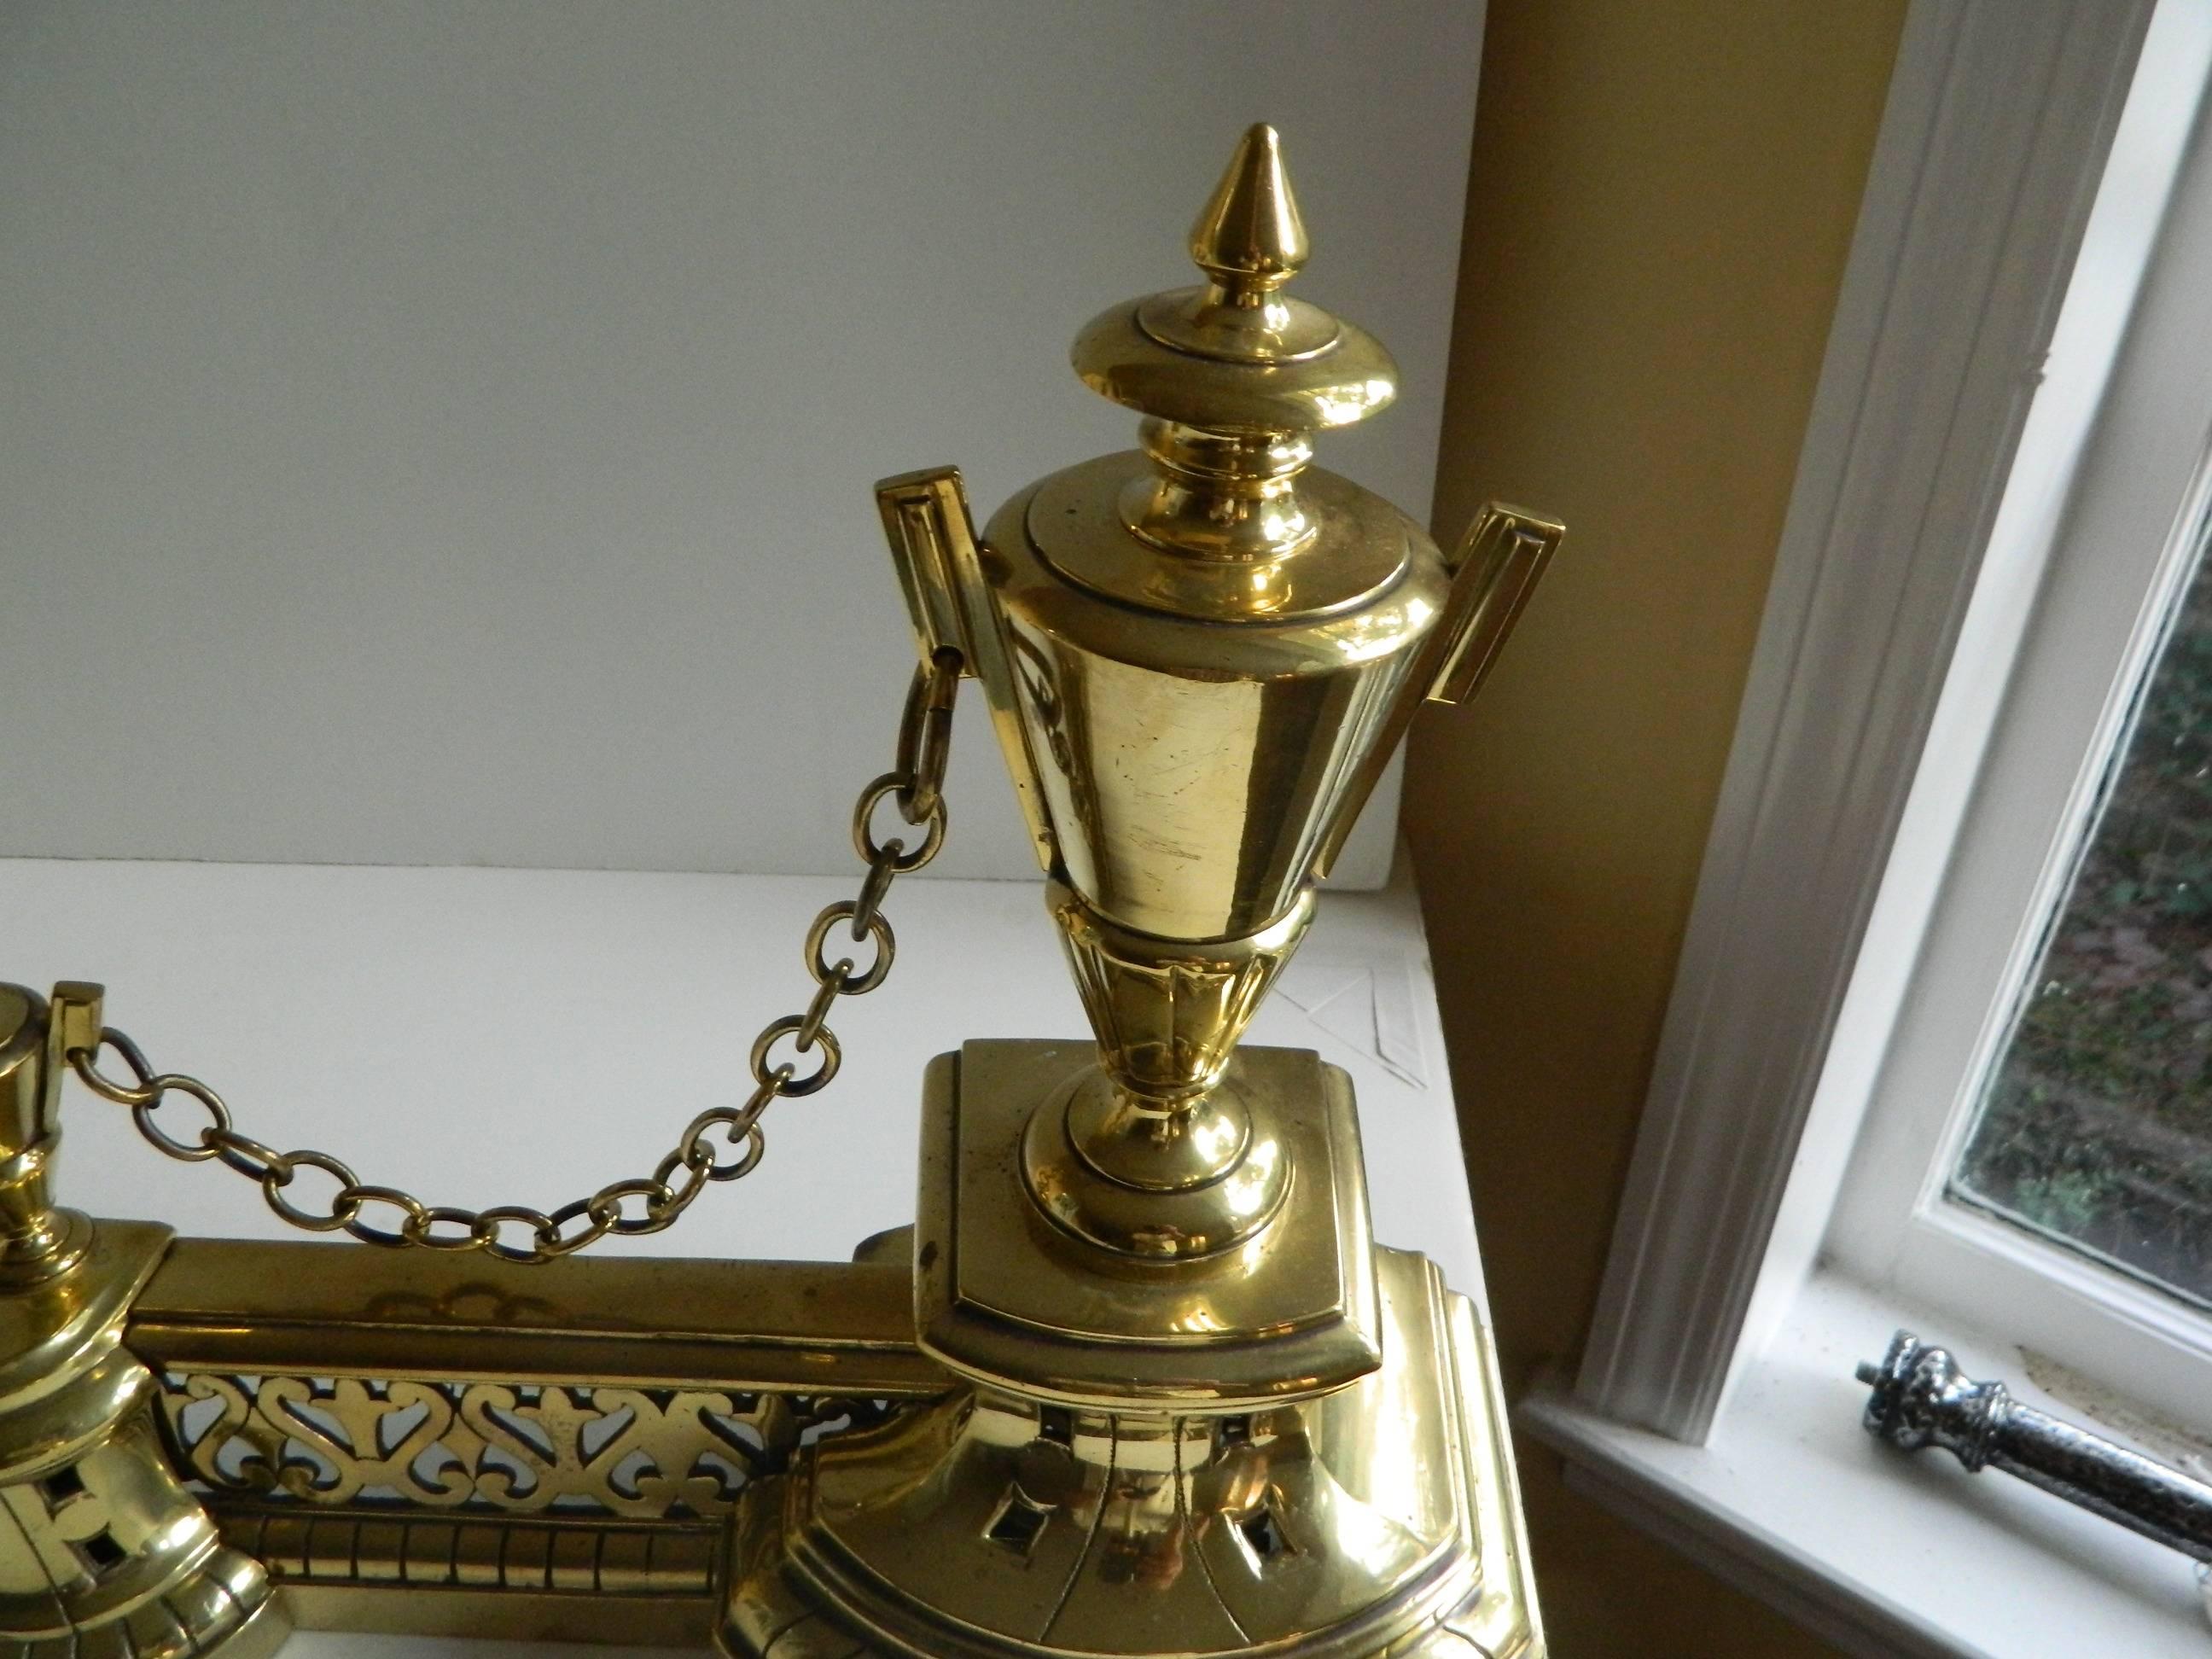 French Pair of Polished Brass Chenets or Andirons with a Fender, Large and Small Urns For Sale